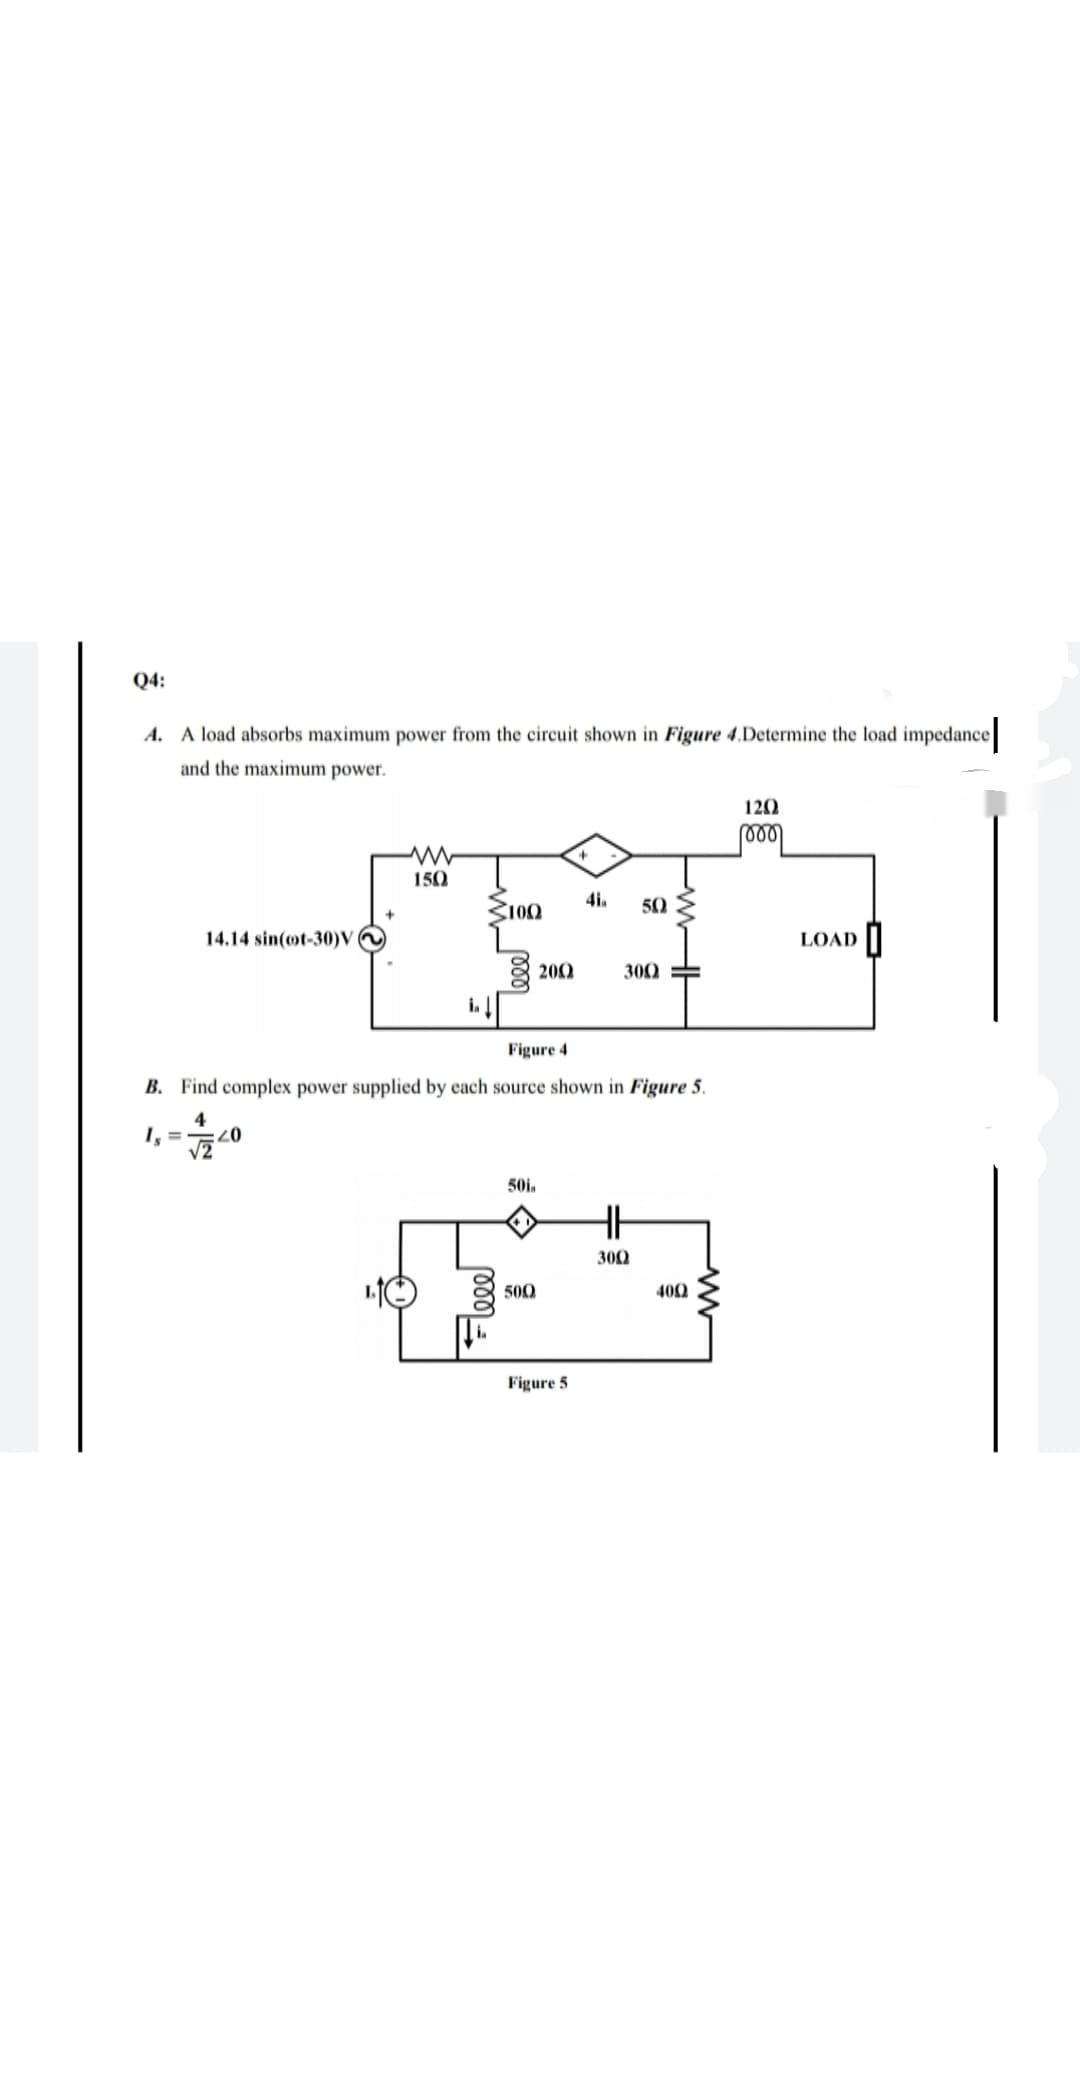 Q4:
A. A load absorbs maximum power from the circuit shown in Figure 4.Determine the load impedance
and the maximum power.
120
150
100
4i.
50
14.14 sin(ot-30)V
LOAD ||
8 200
300
Figure 4
B. Find complex power supplied by each source shown in Figure 5.
4
07:
50i.
300
500
400
Figure 5
